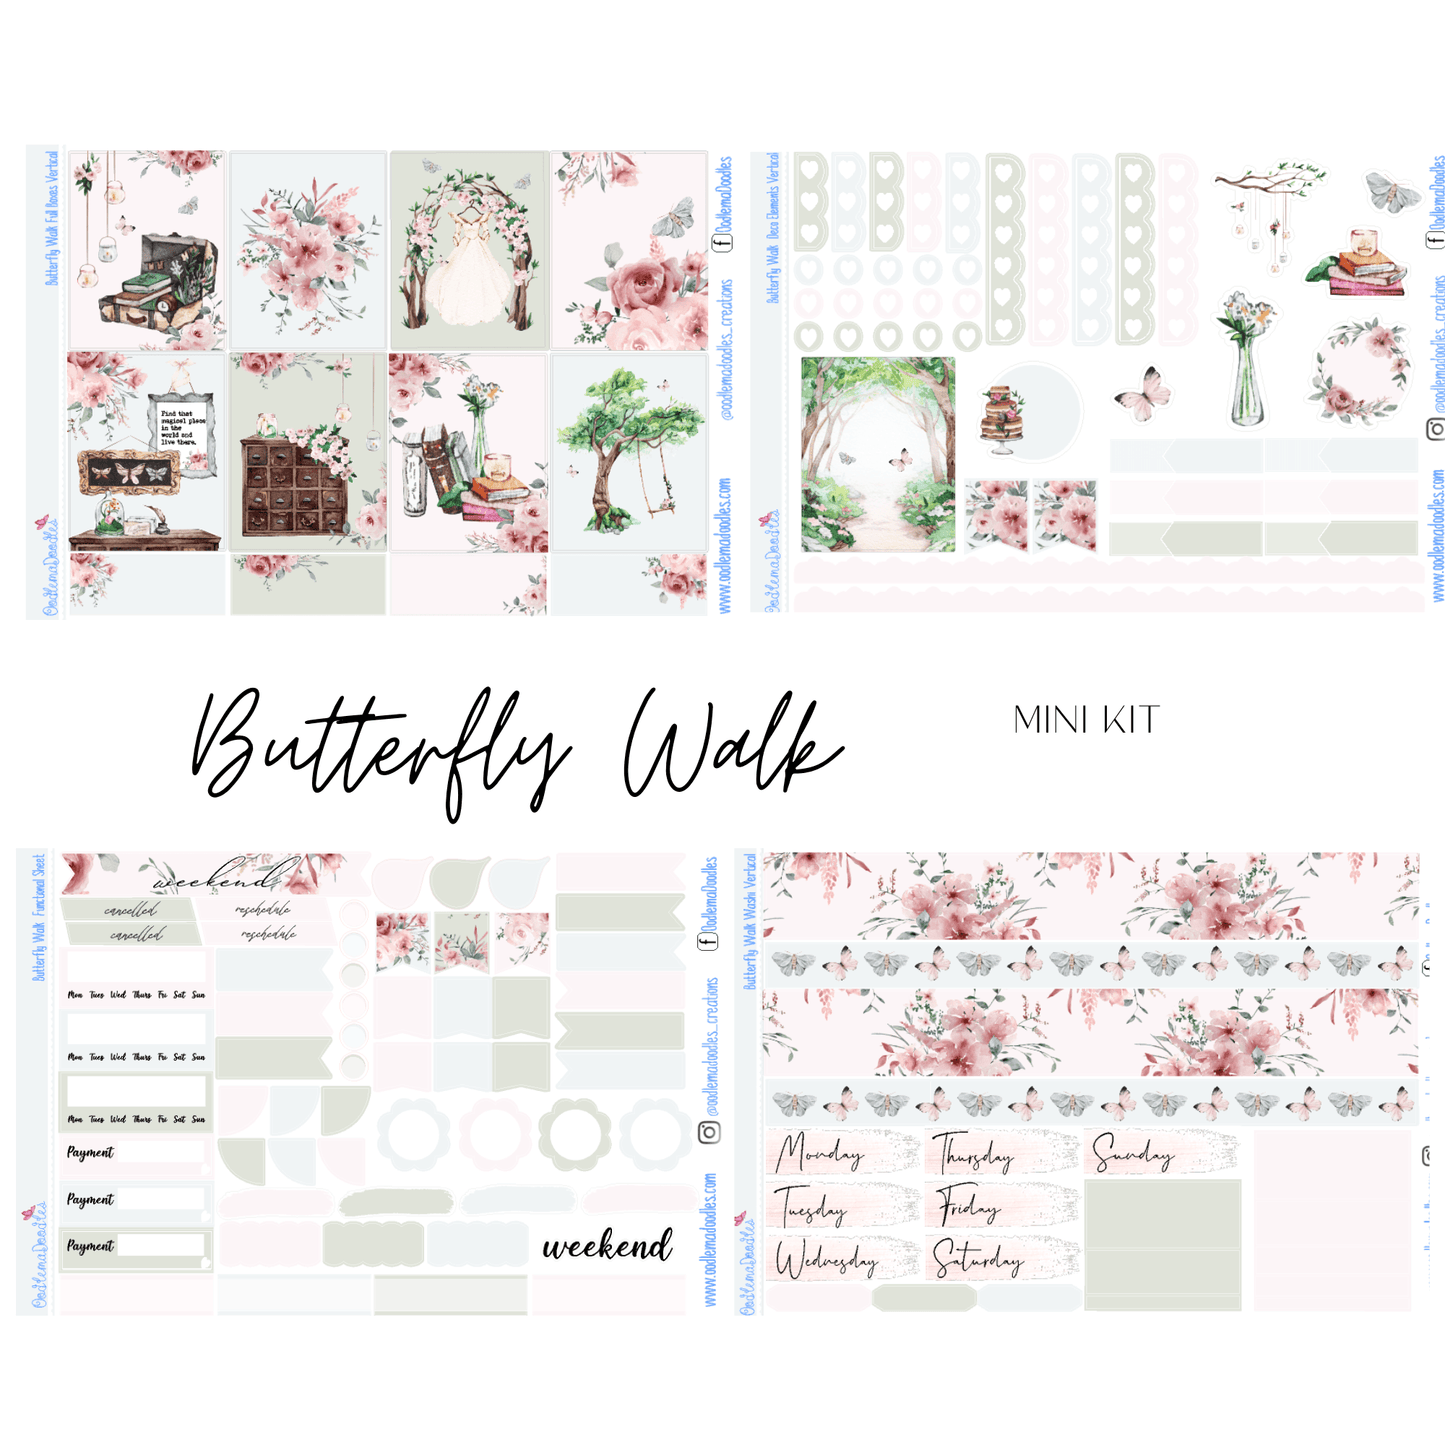 Butterfly Walk Mini Kit - oodlemadoodles